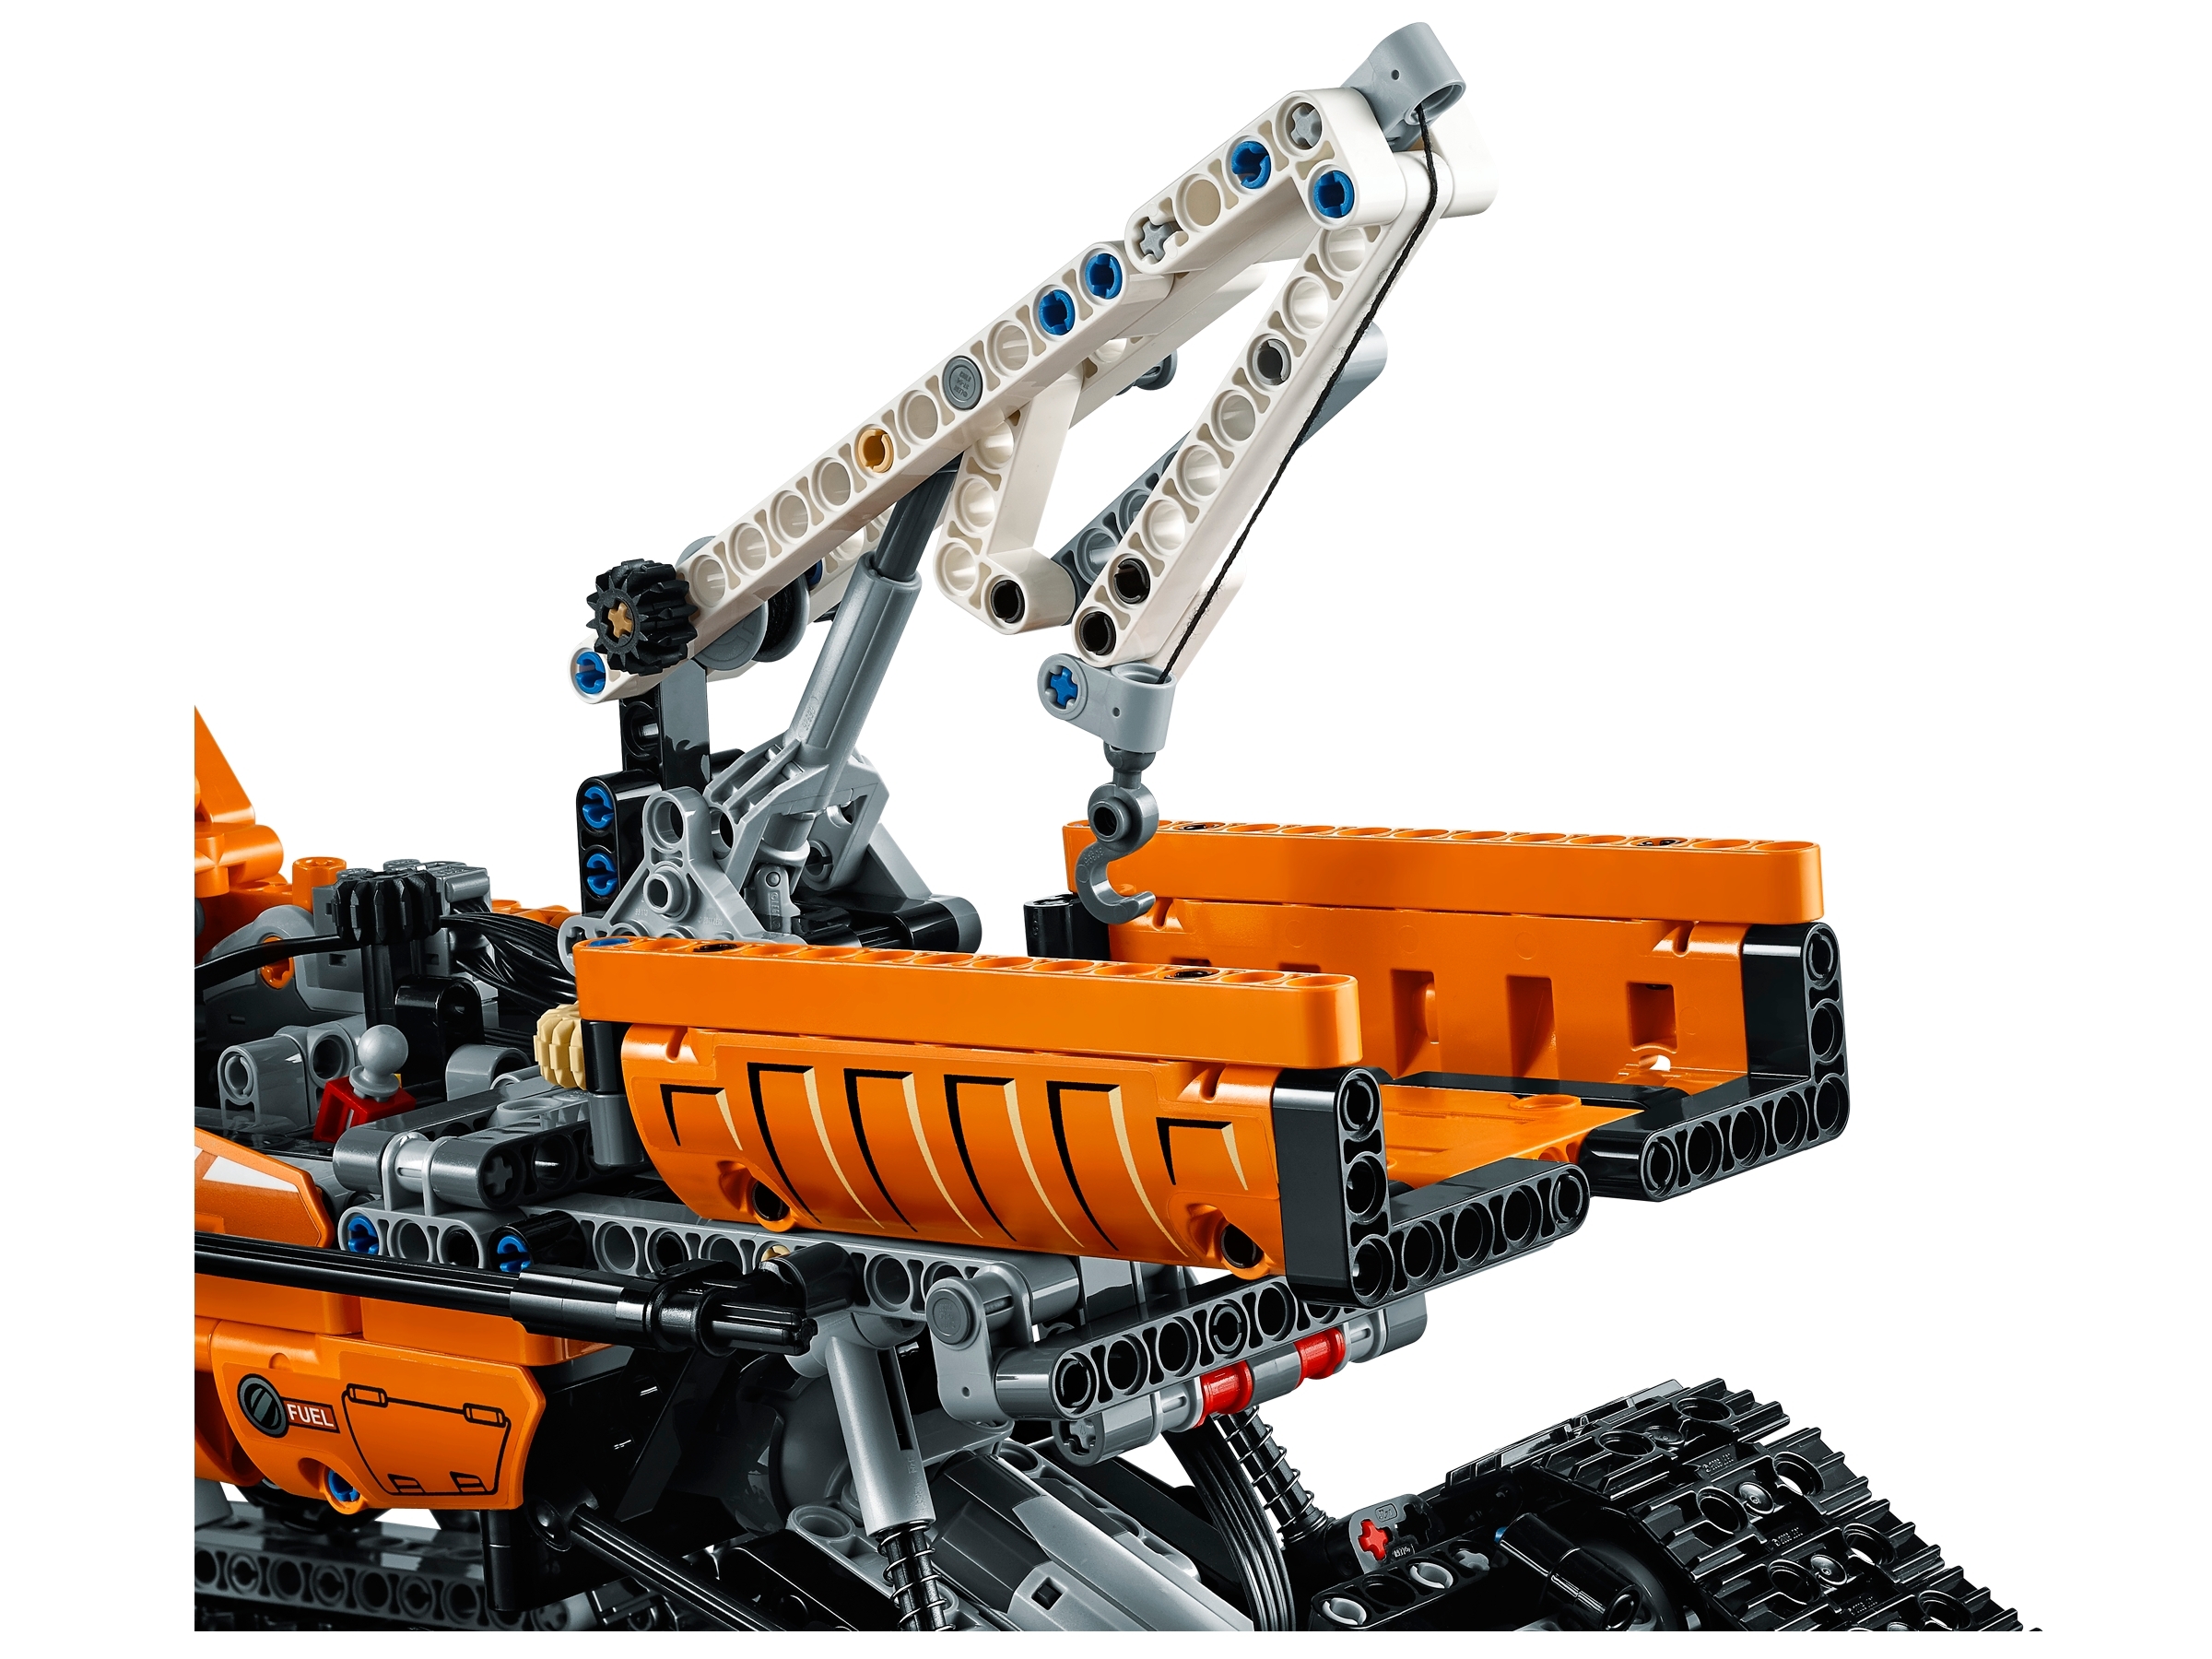 Arctic Truck 42038 | Technic™ | Buy online at the Official LEGO 